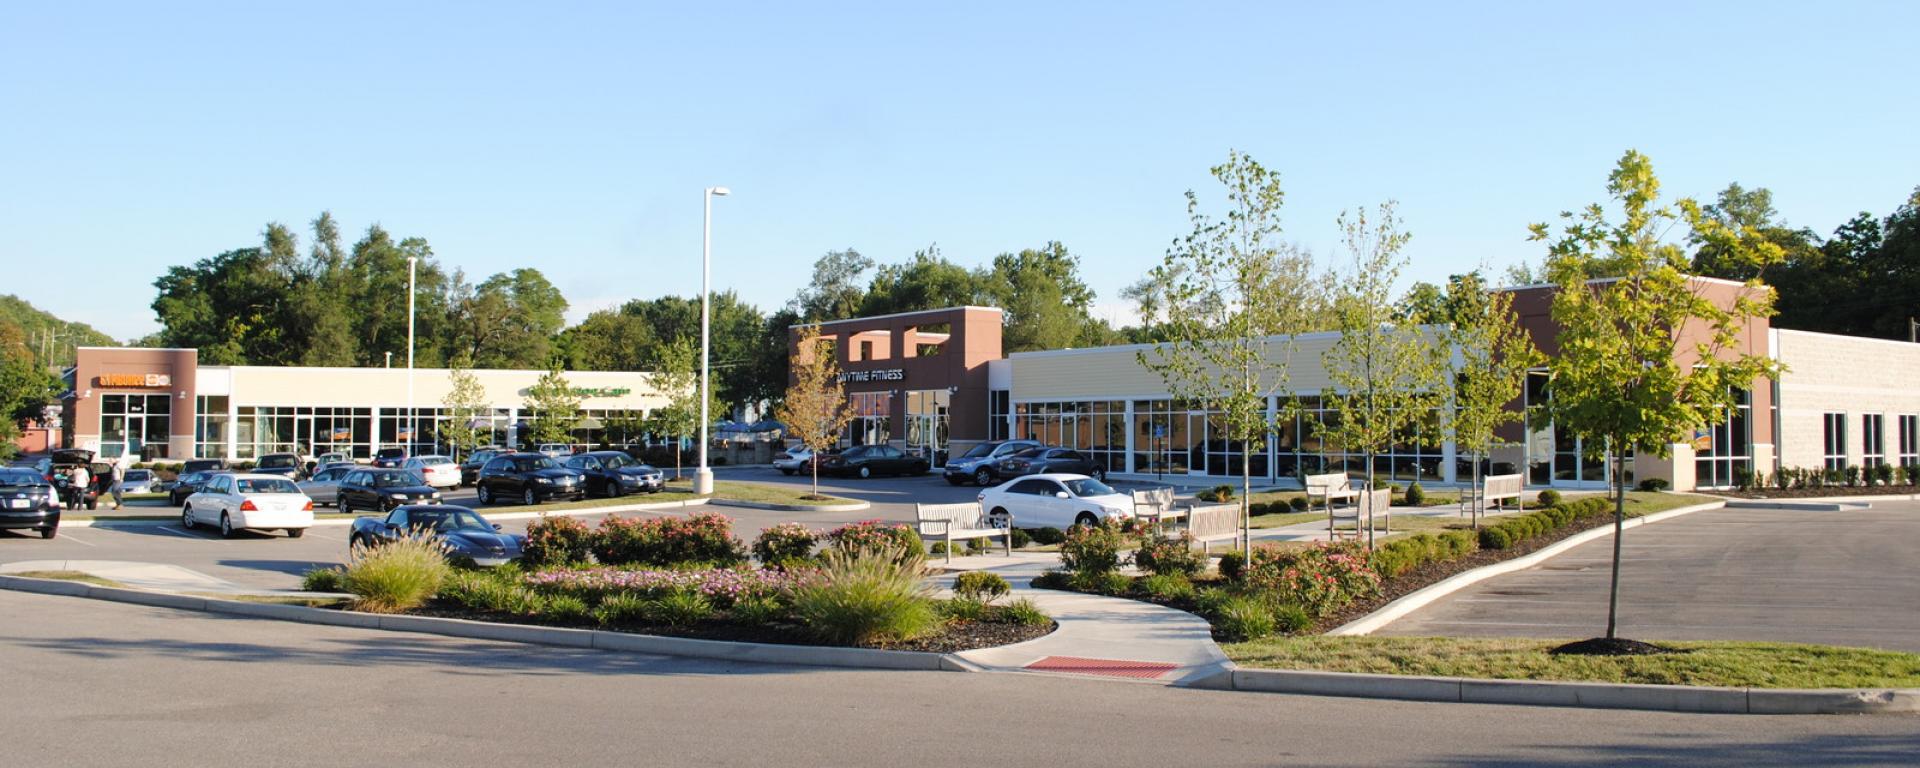 front entrance and parking lot 